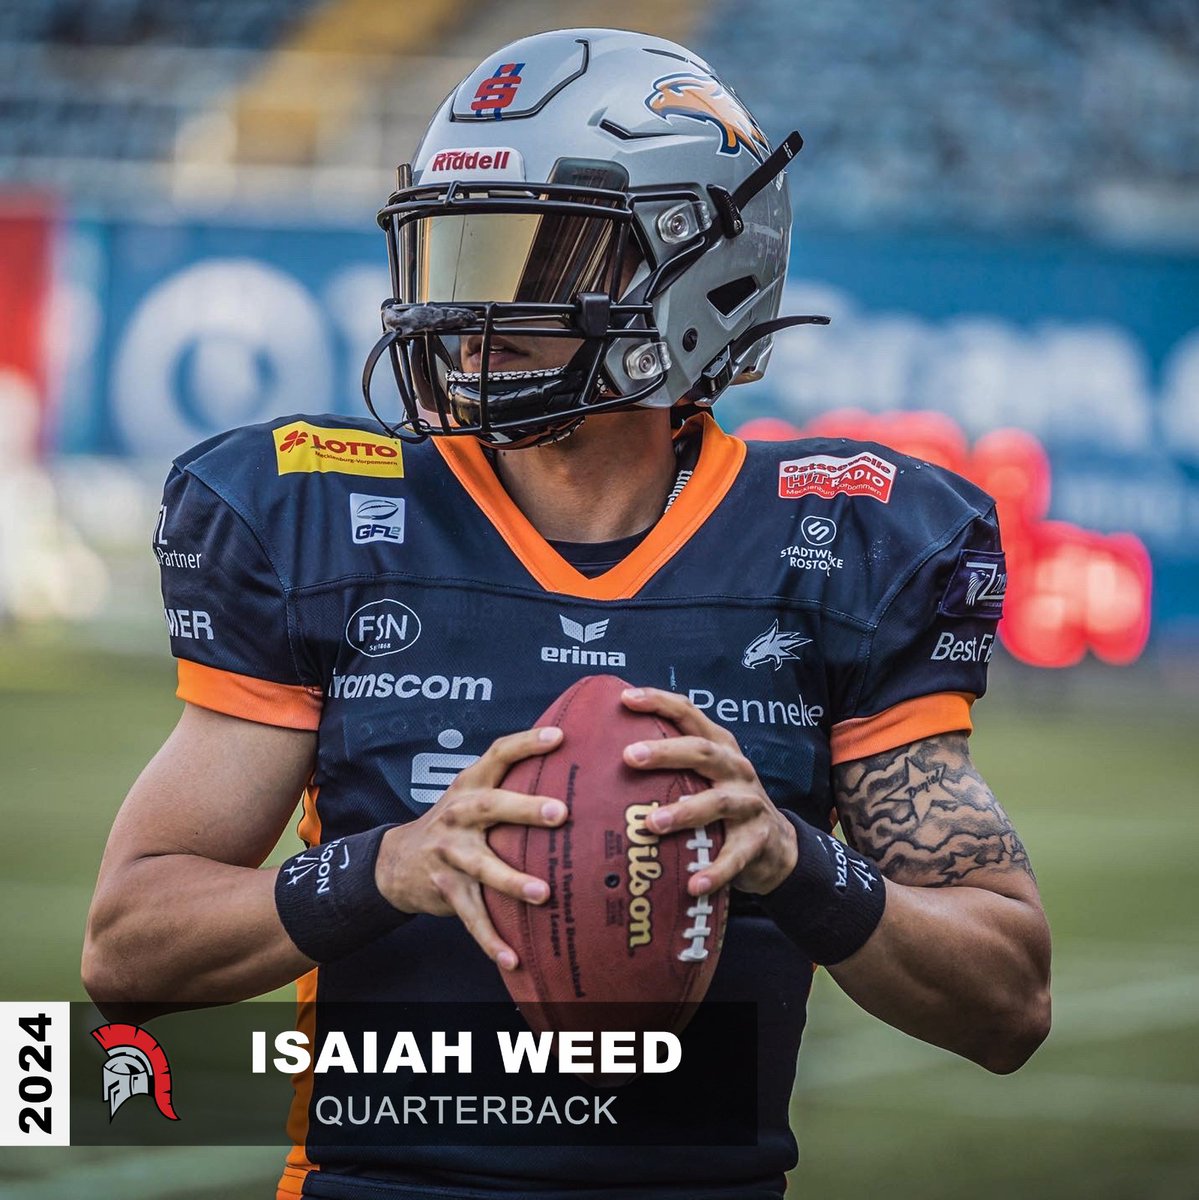 Isaiah Weed wird der Quarterback der Centurions in den Saison 2024! 🚀 HC Gregg Brandon: 'Isaiah has all the tools we look for in a QB. Smart- accurate and mobile. Great leadership skills. Looking forward to working with him.'